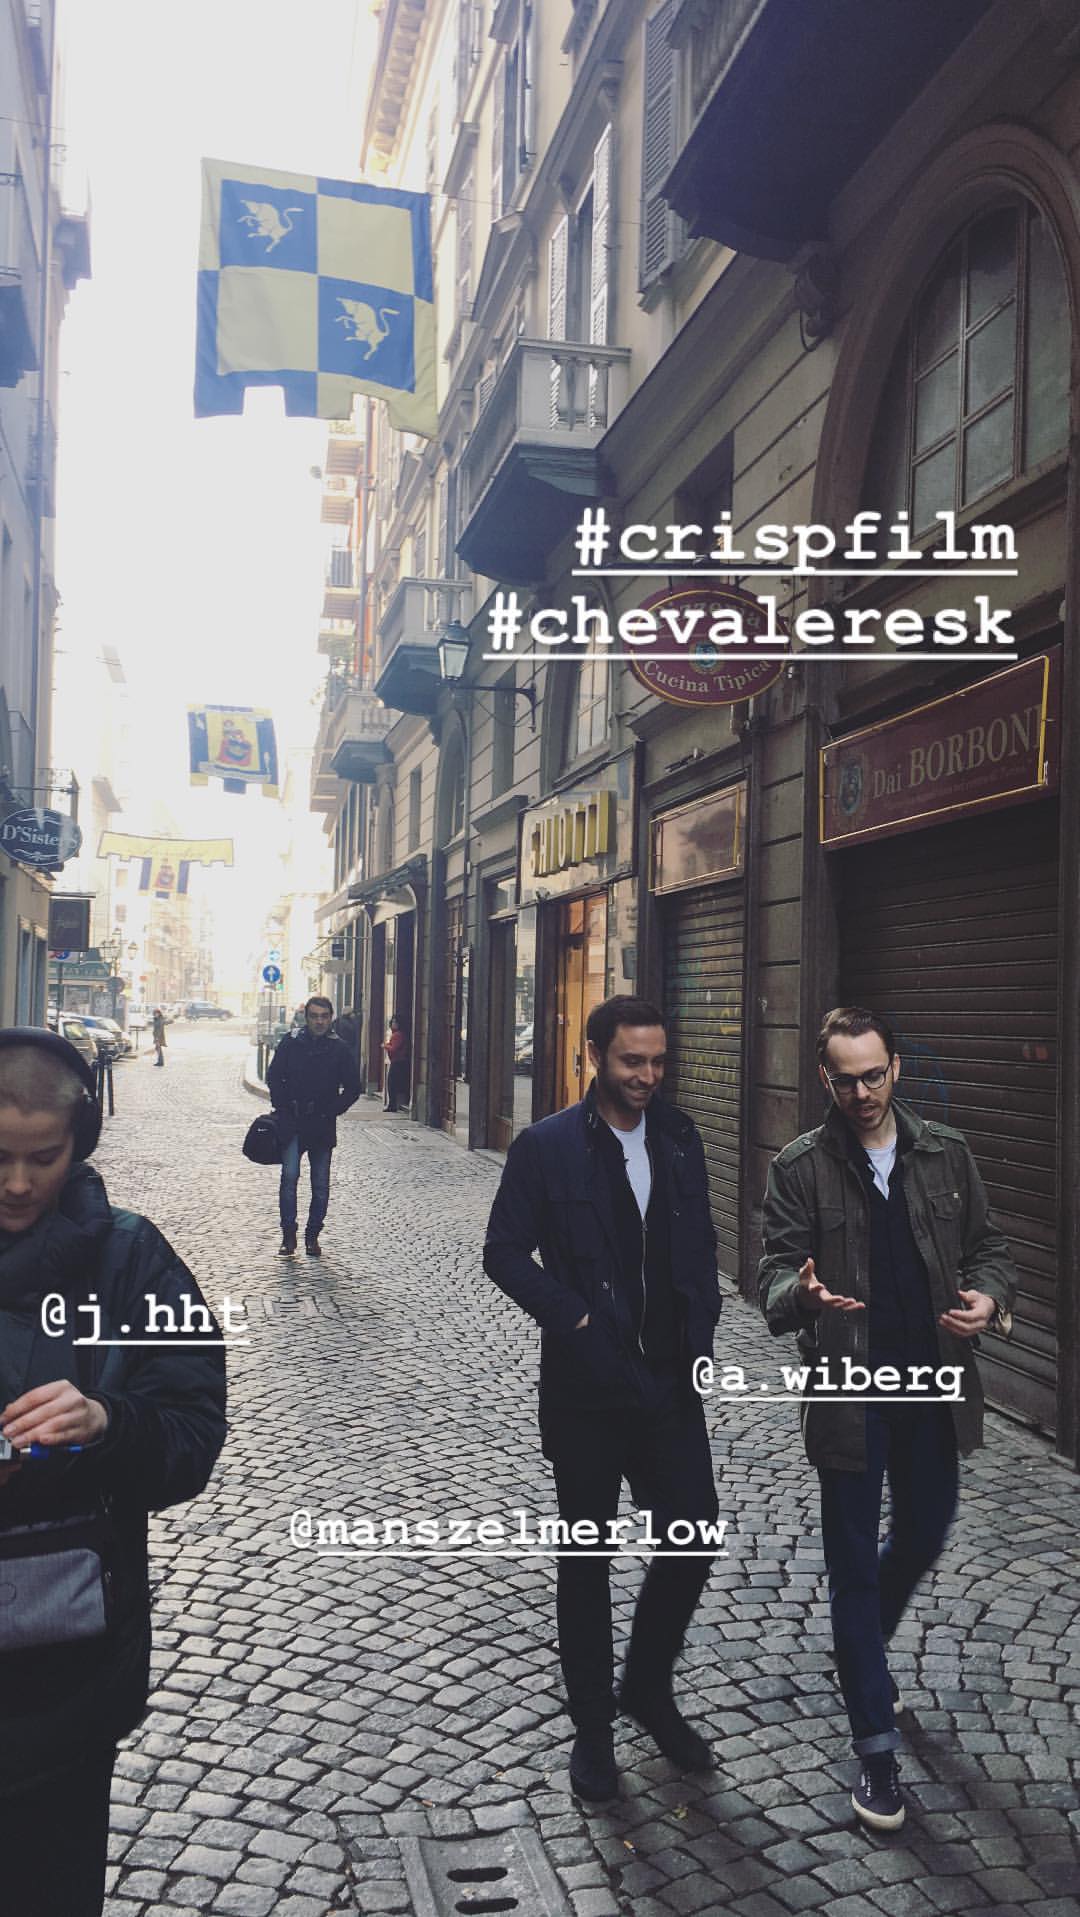 Chevaleresk in Italy to shoot with partner Lavazza